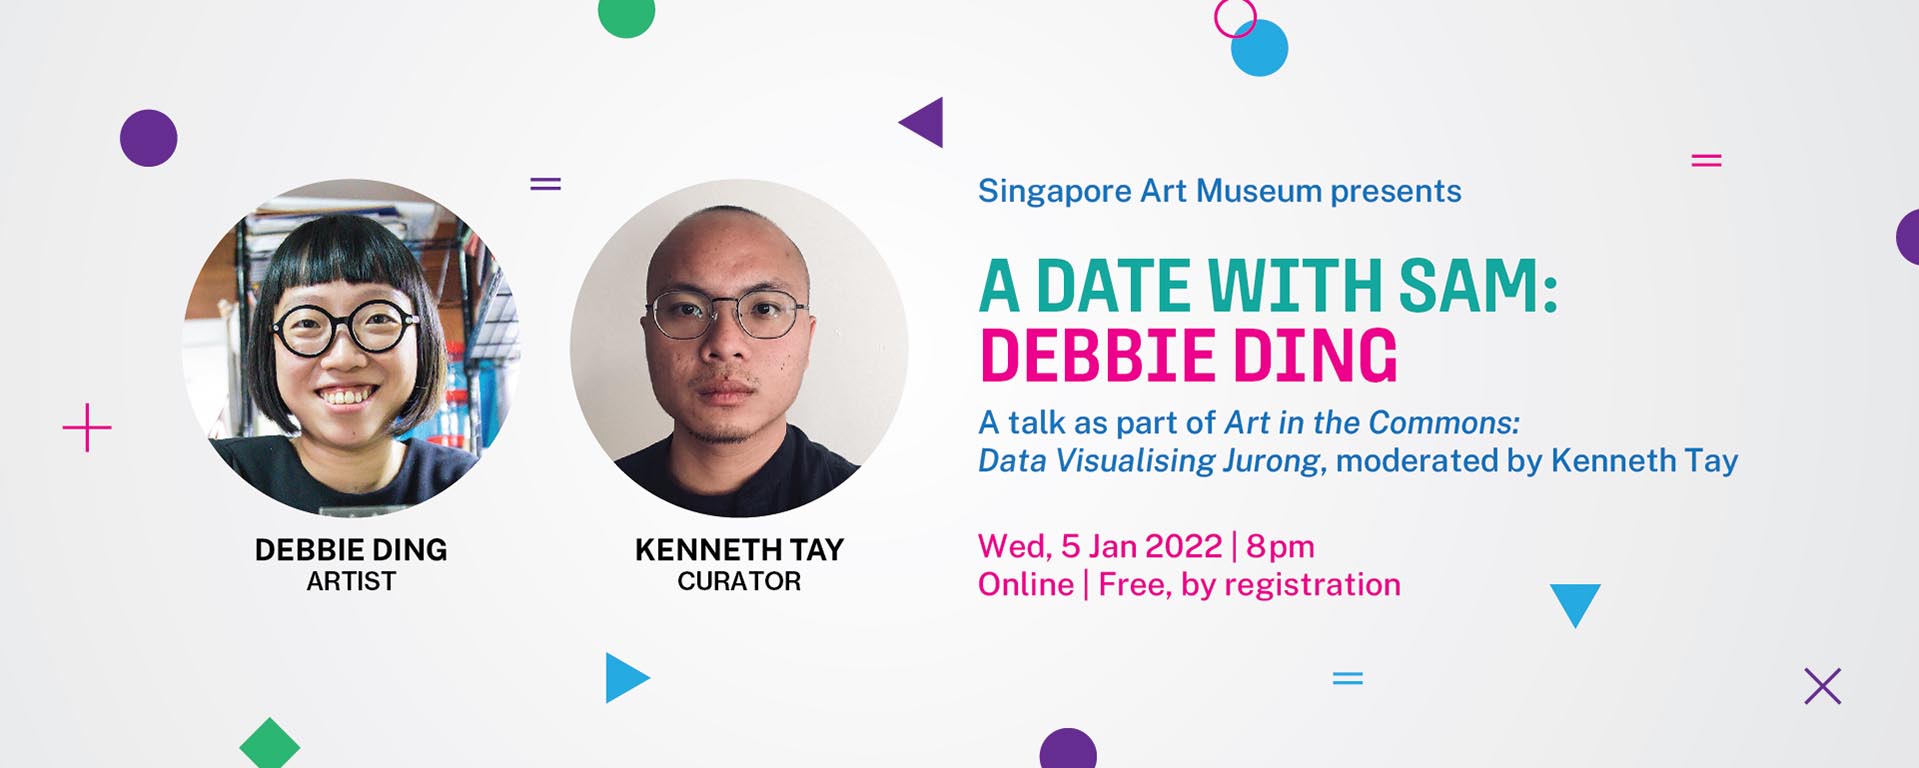 A Date with SAM: Debbie Ding